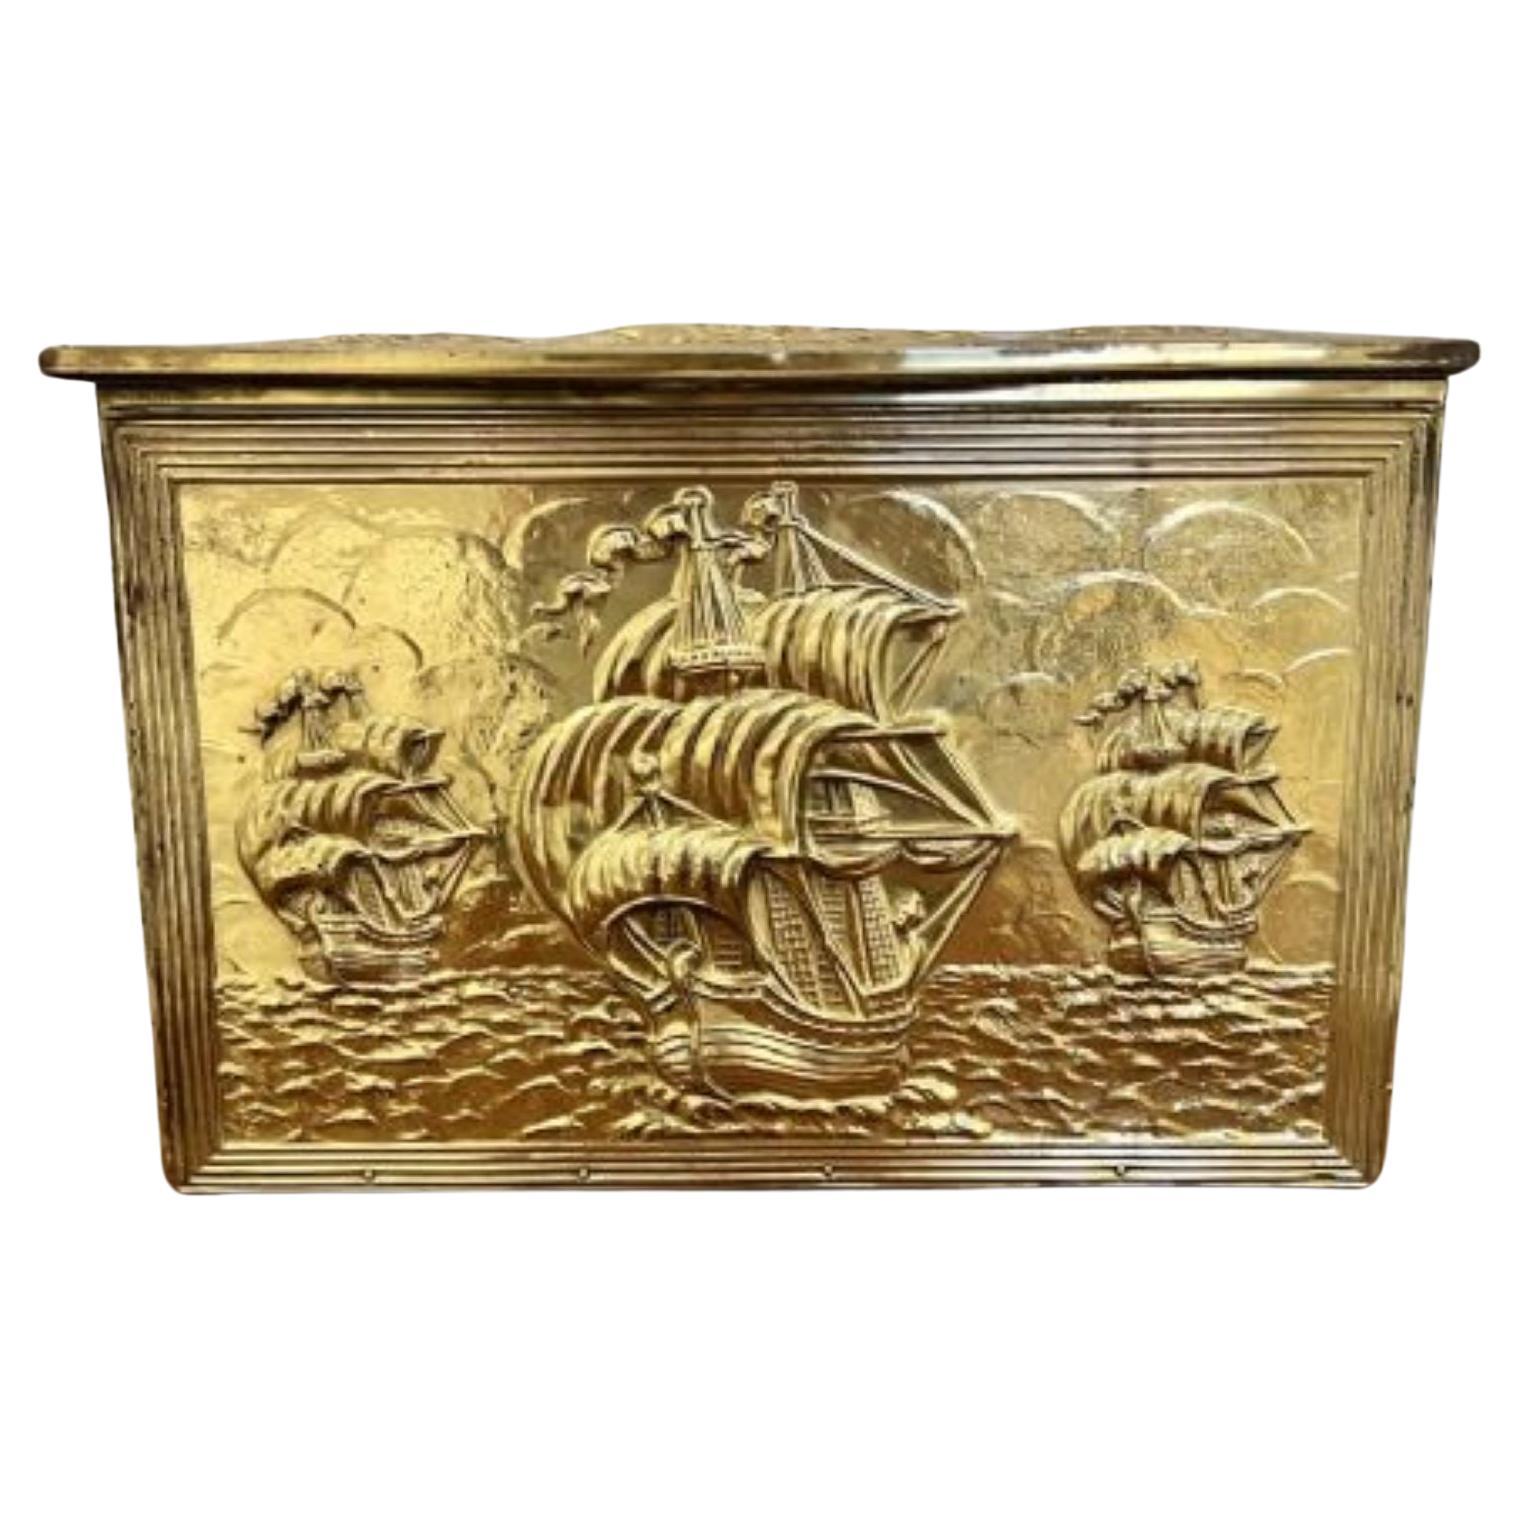 Ornate antique quality brass coal box For Sale